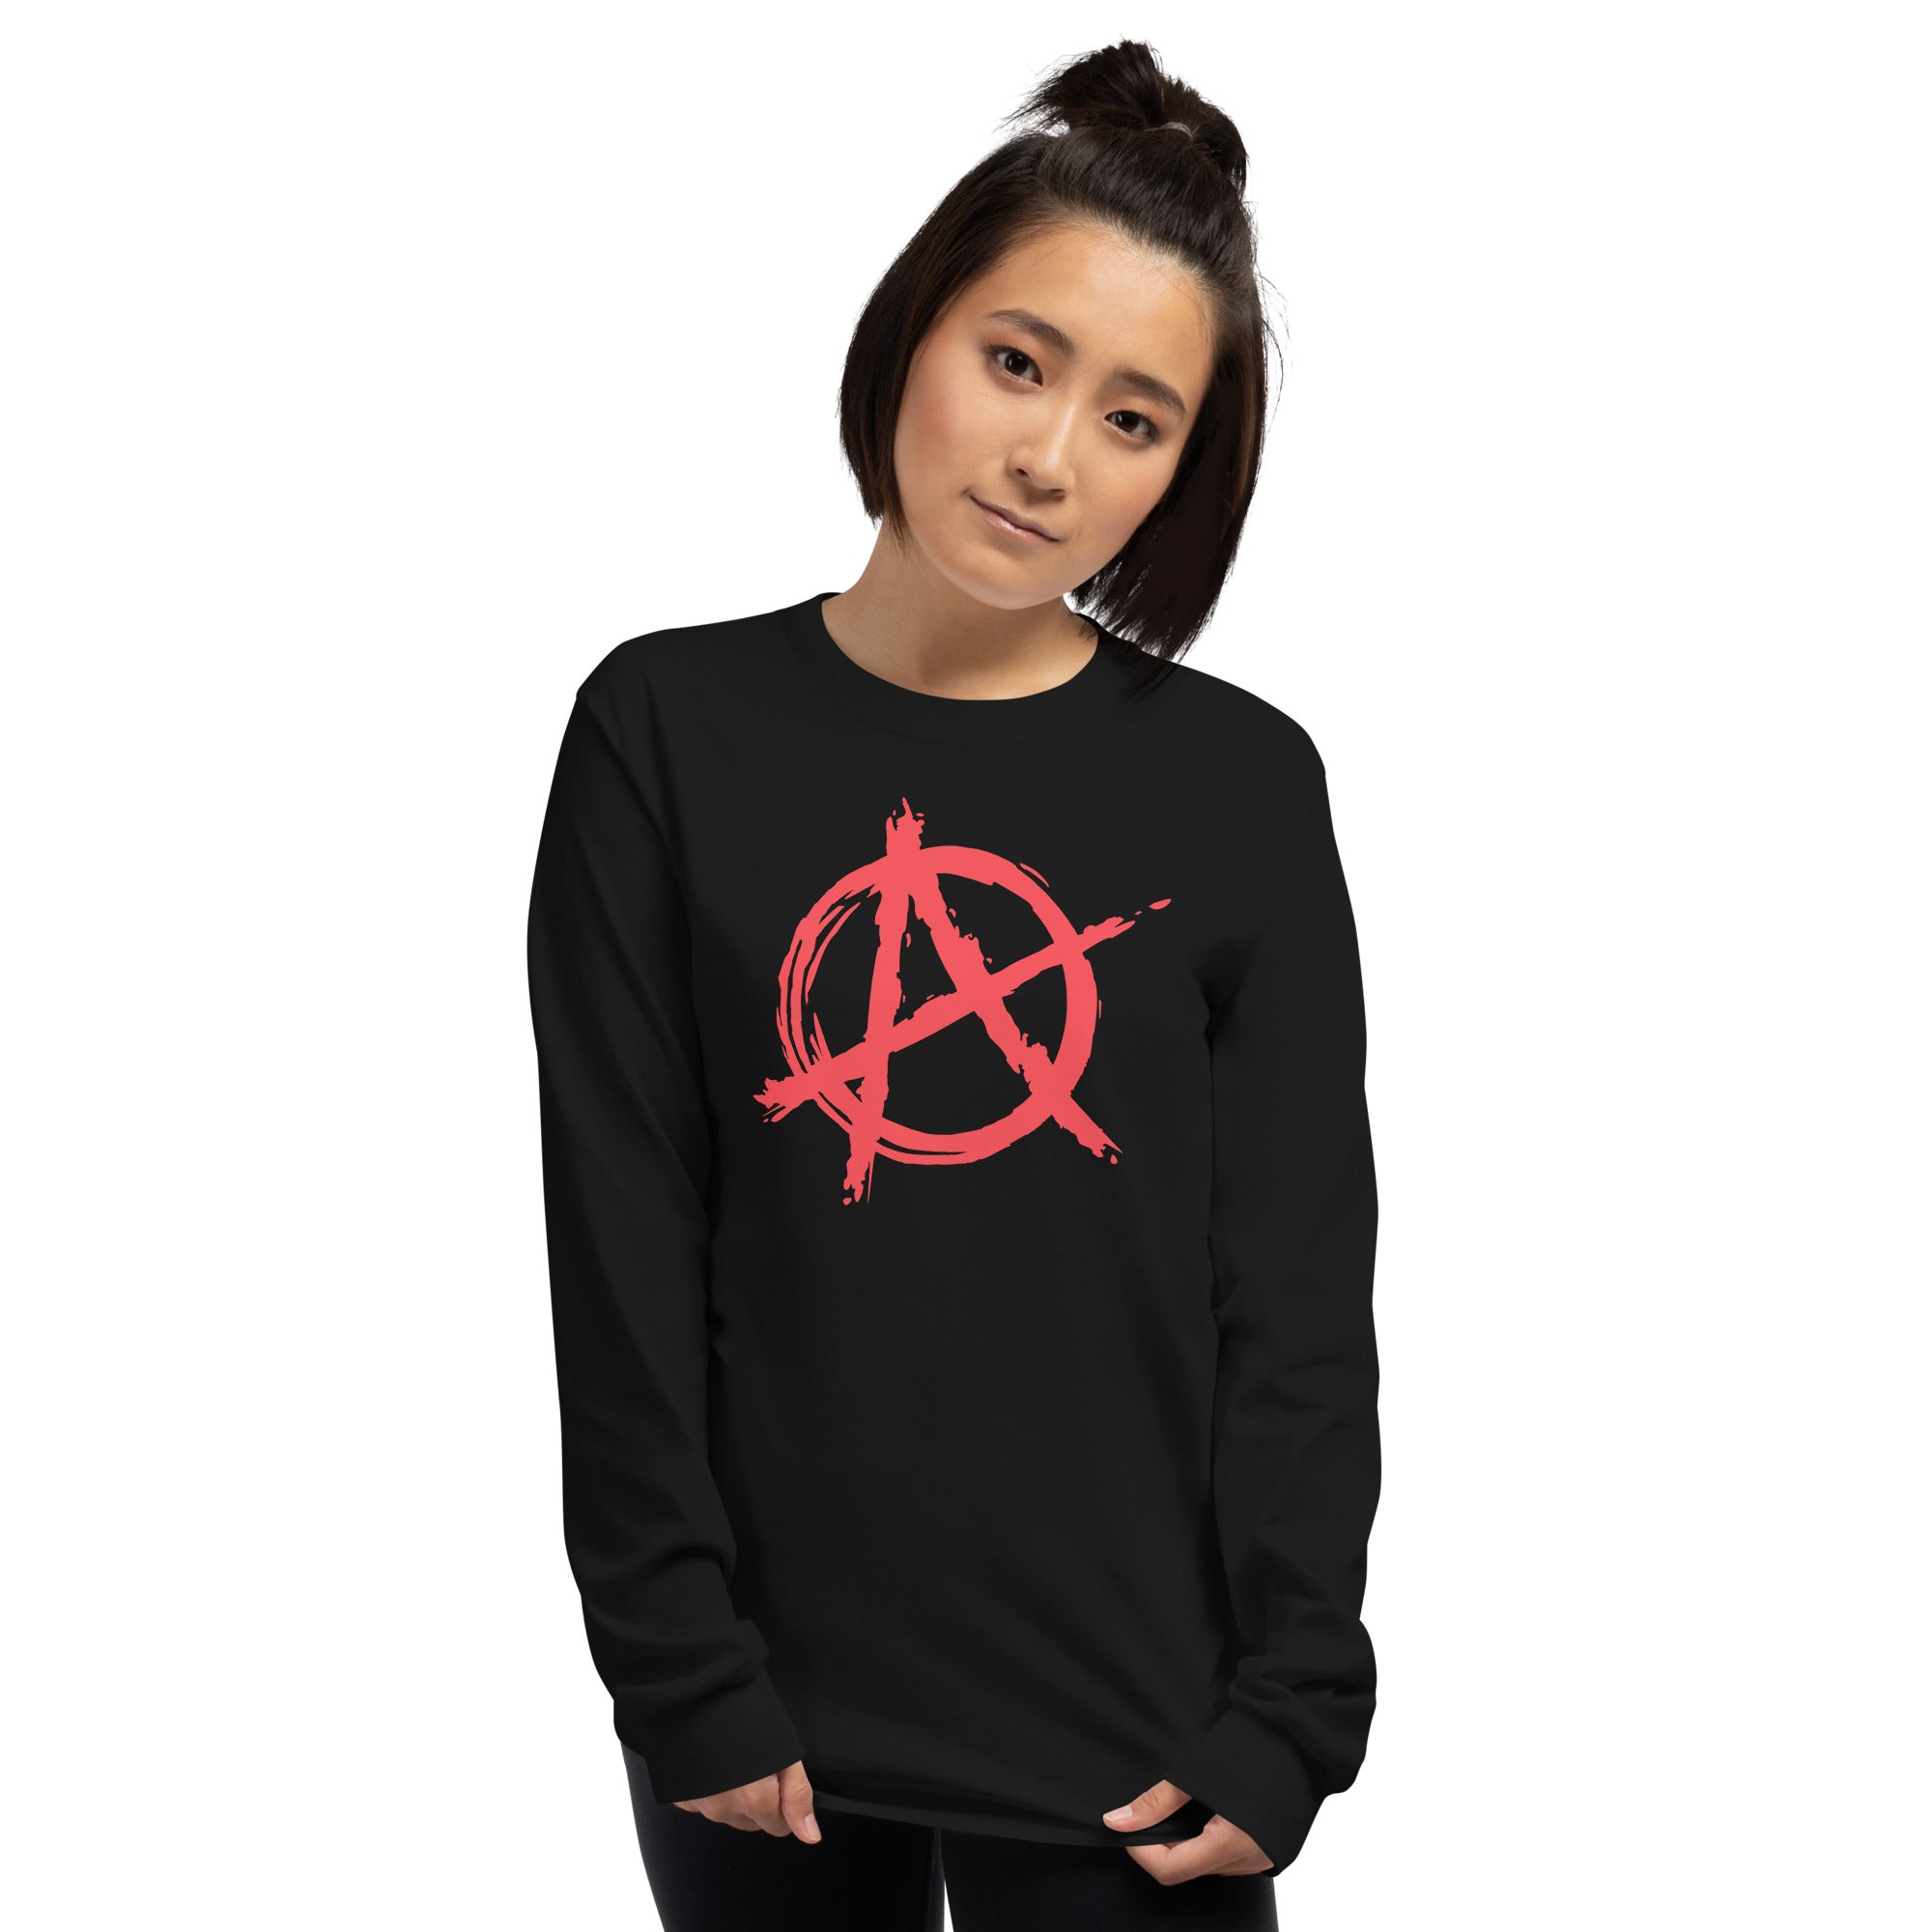 Red Anarchy is Order Symbol Punk Rock Long Sleeve Shirt - Edge of Life Designs